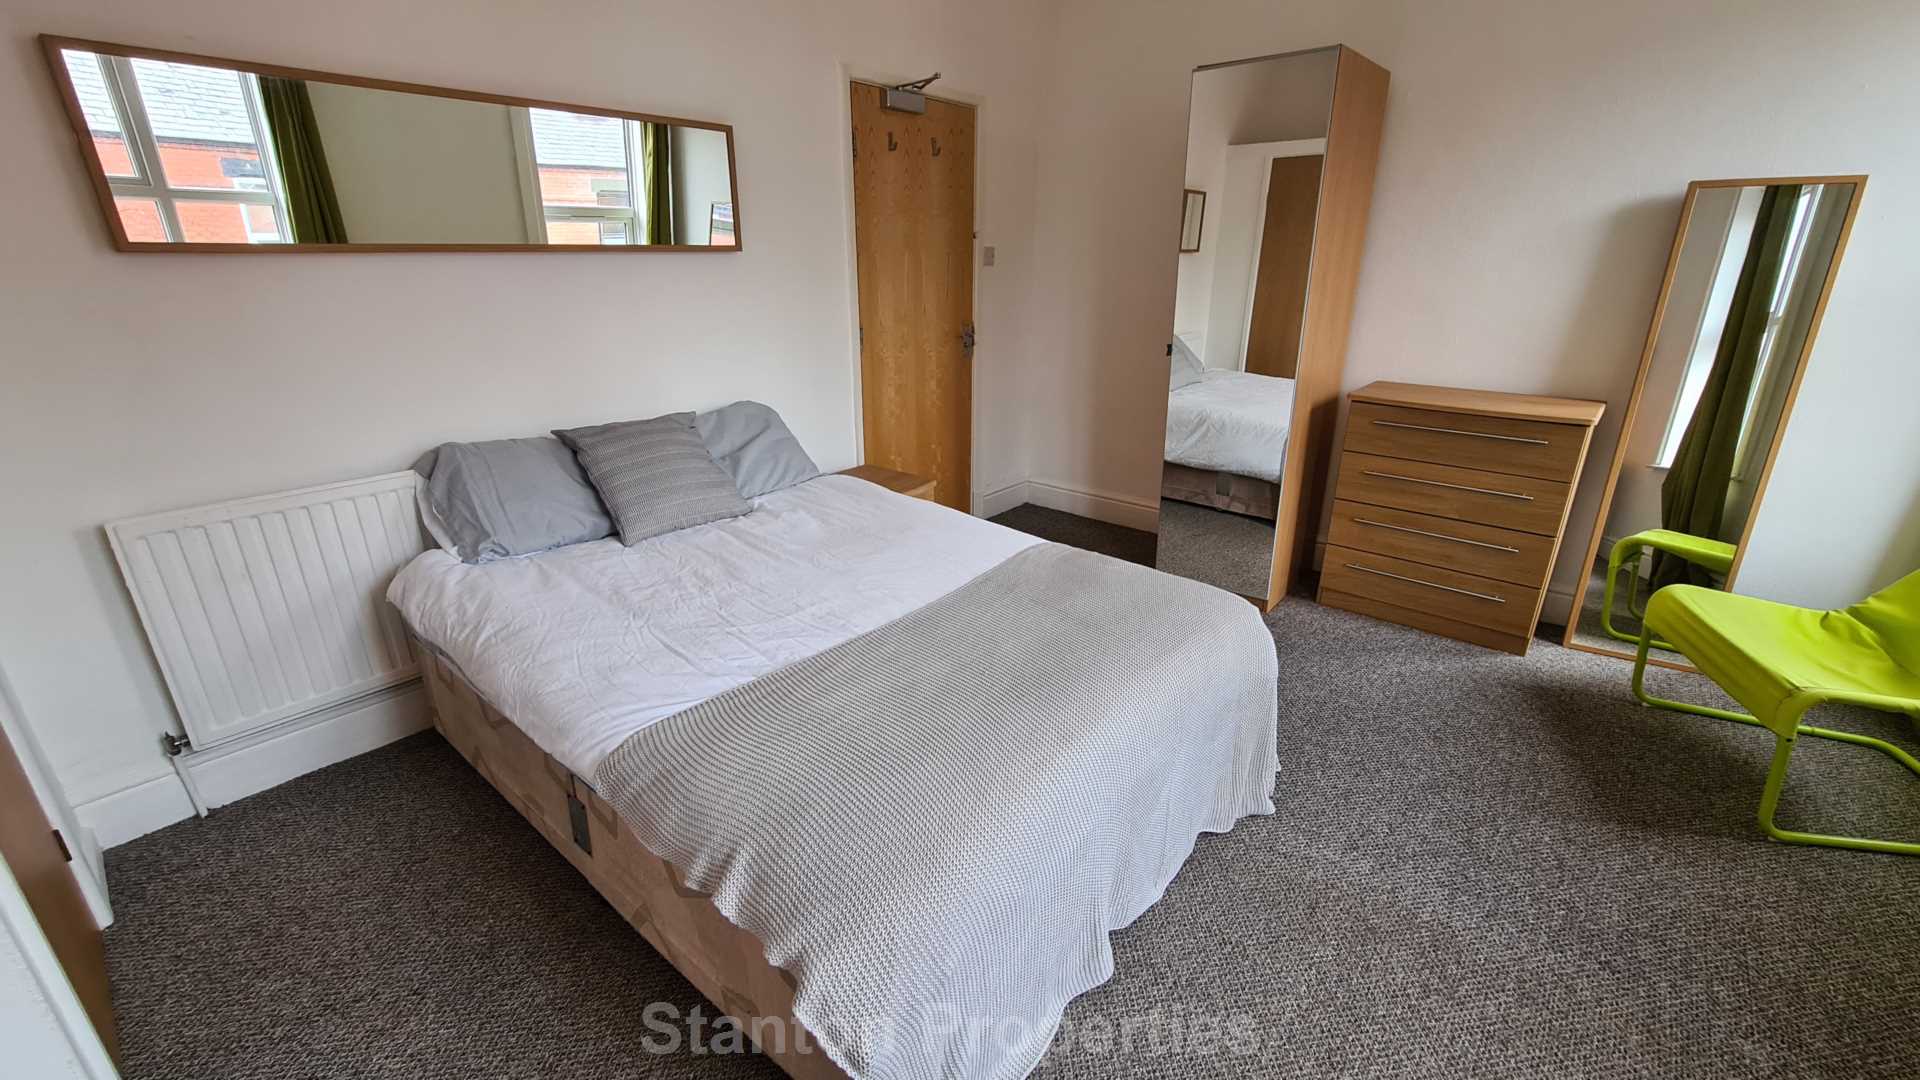 £130 pppw, See Video Tour, Mabfield Road, Fallowfield, Image 30